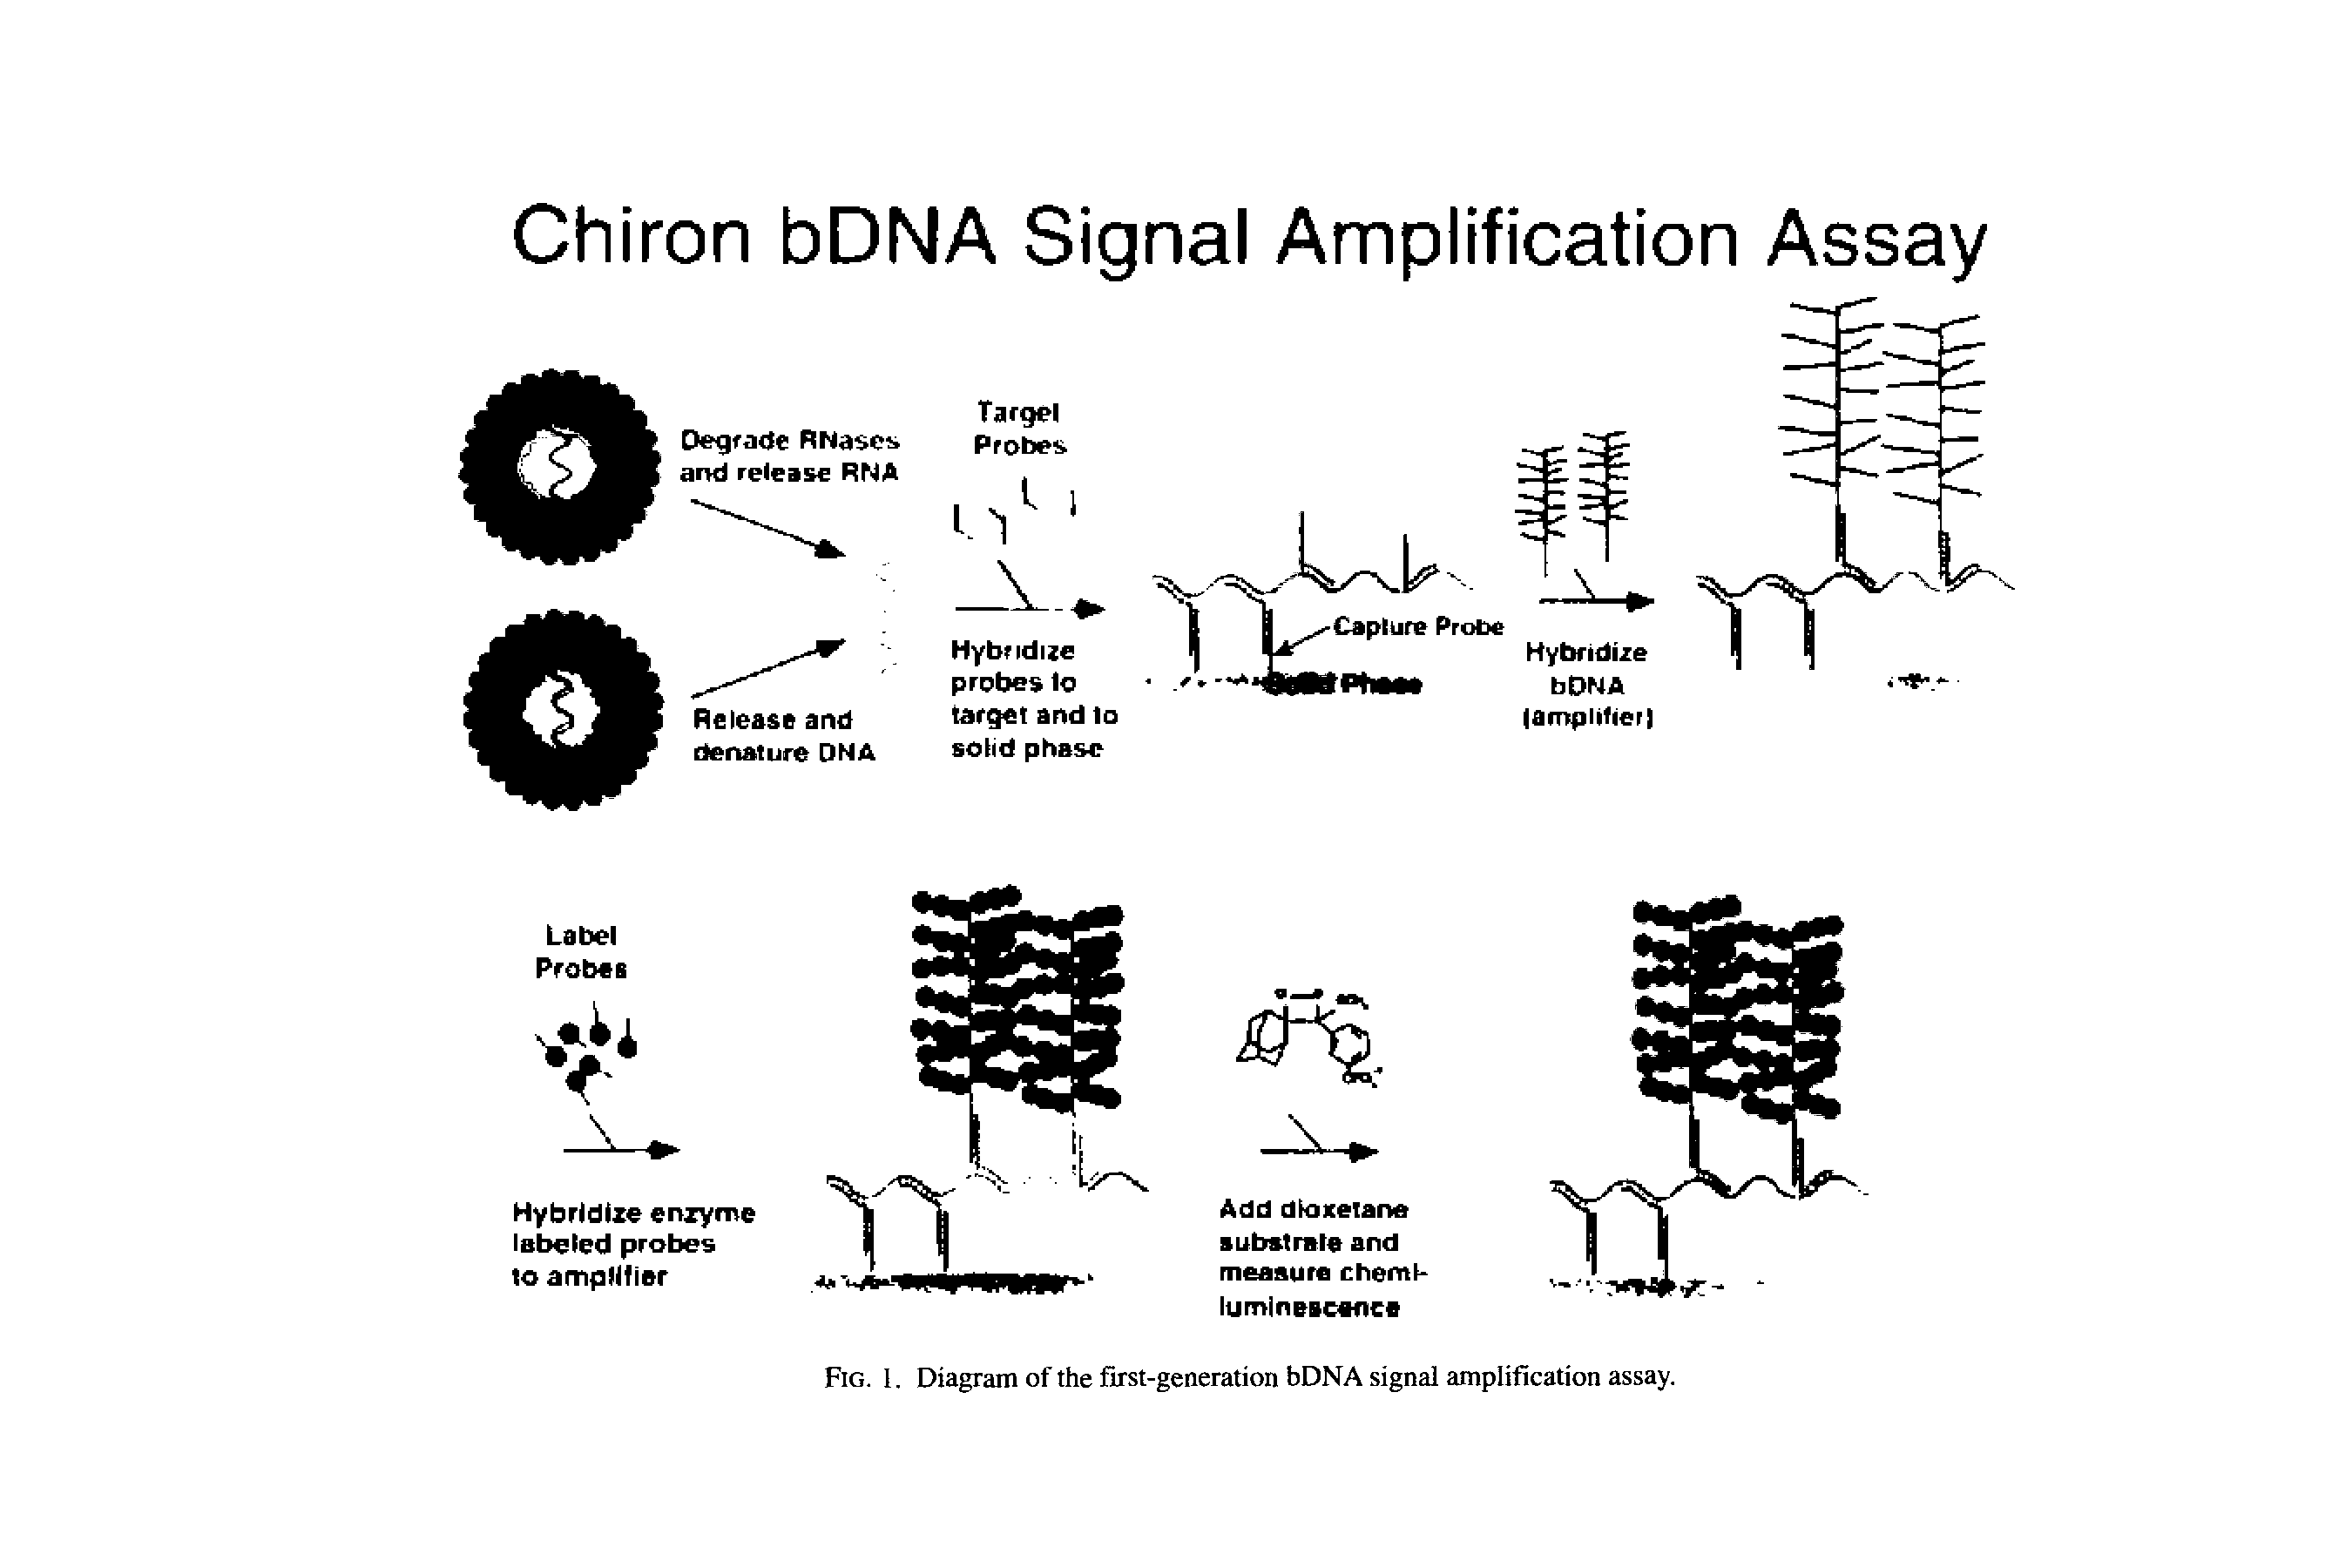 Fig. I. Diagram of the first-generation bDNA signal amplification assay.